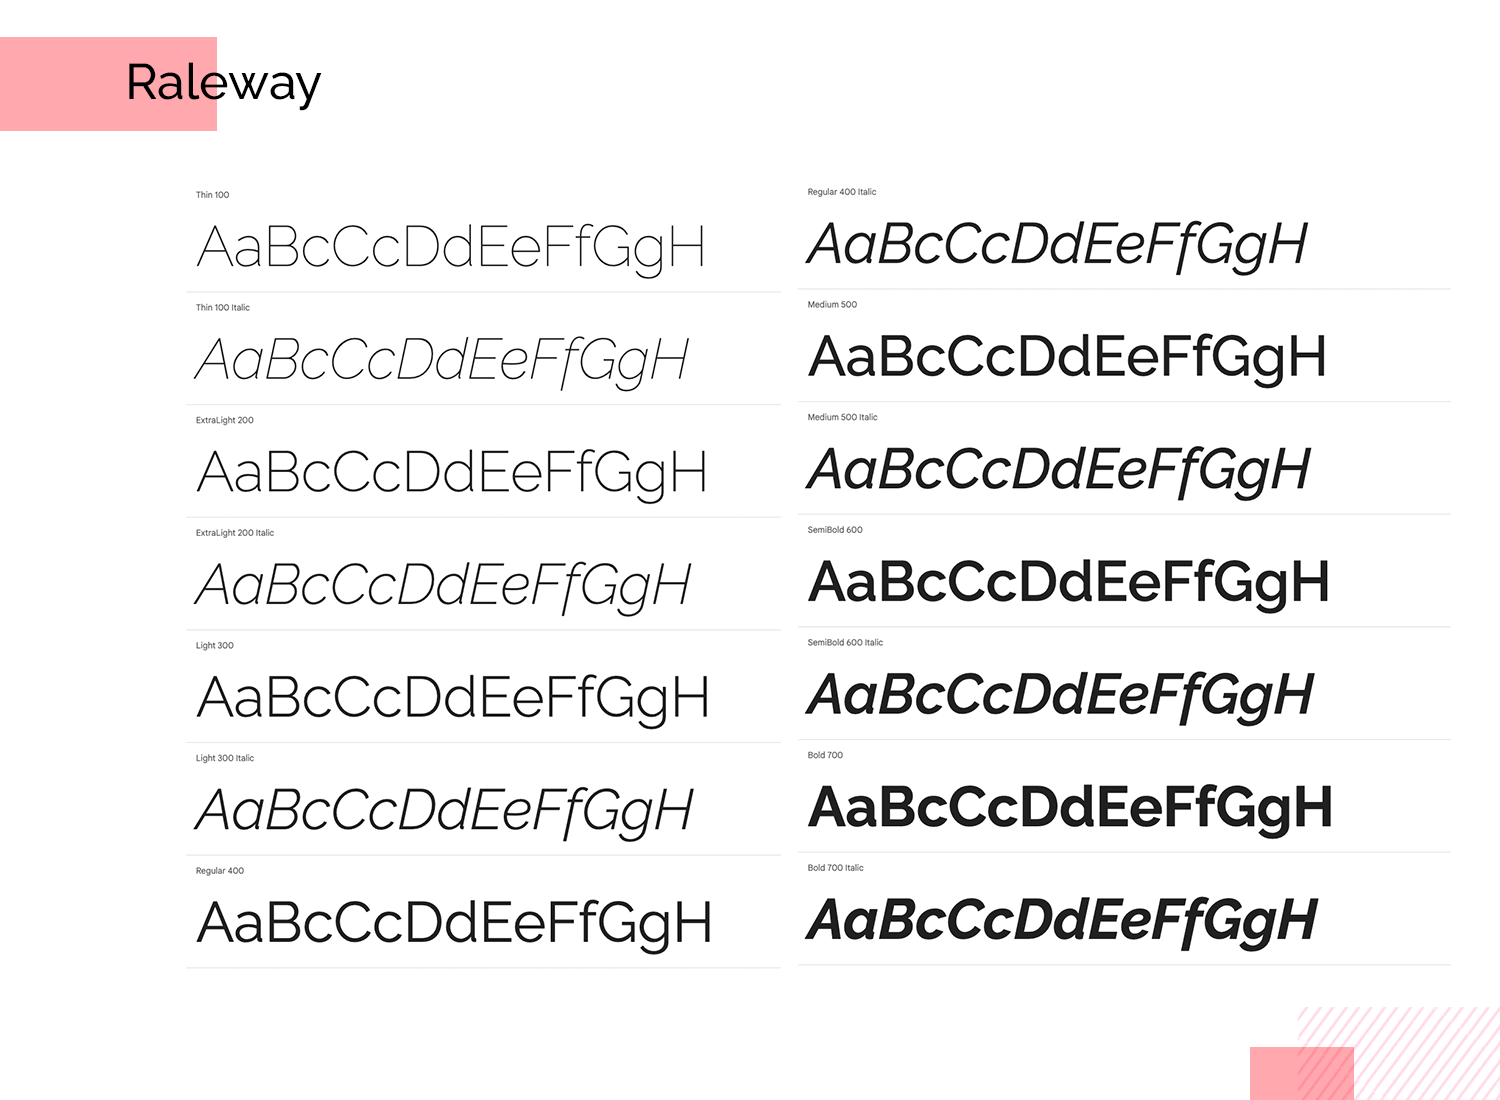 Raleway font variations in bold, italic, regular, and book styles